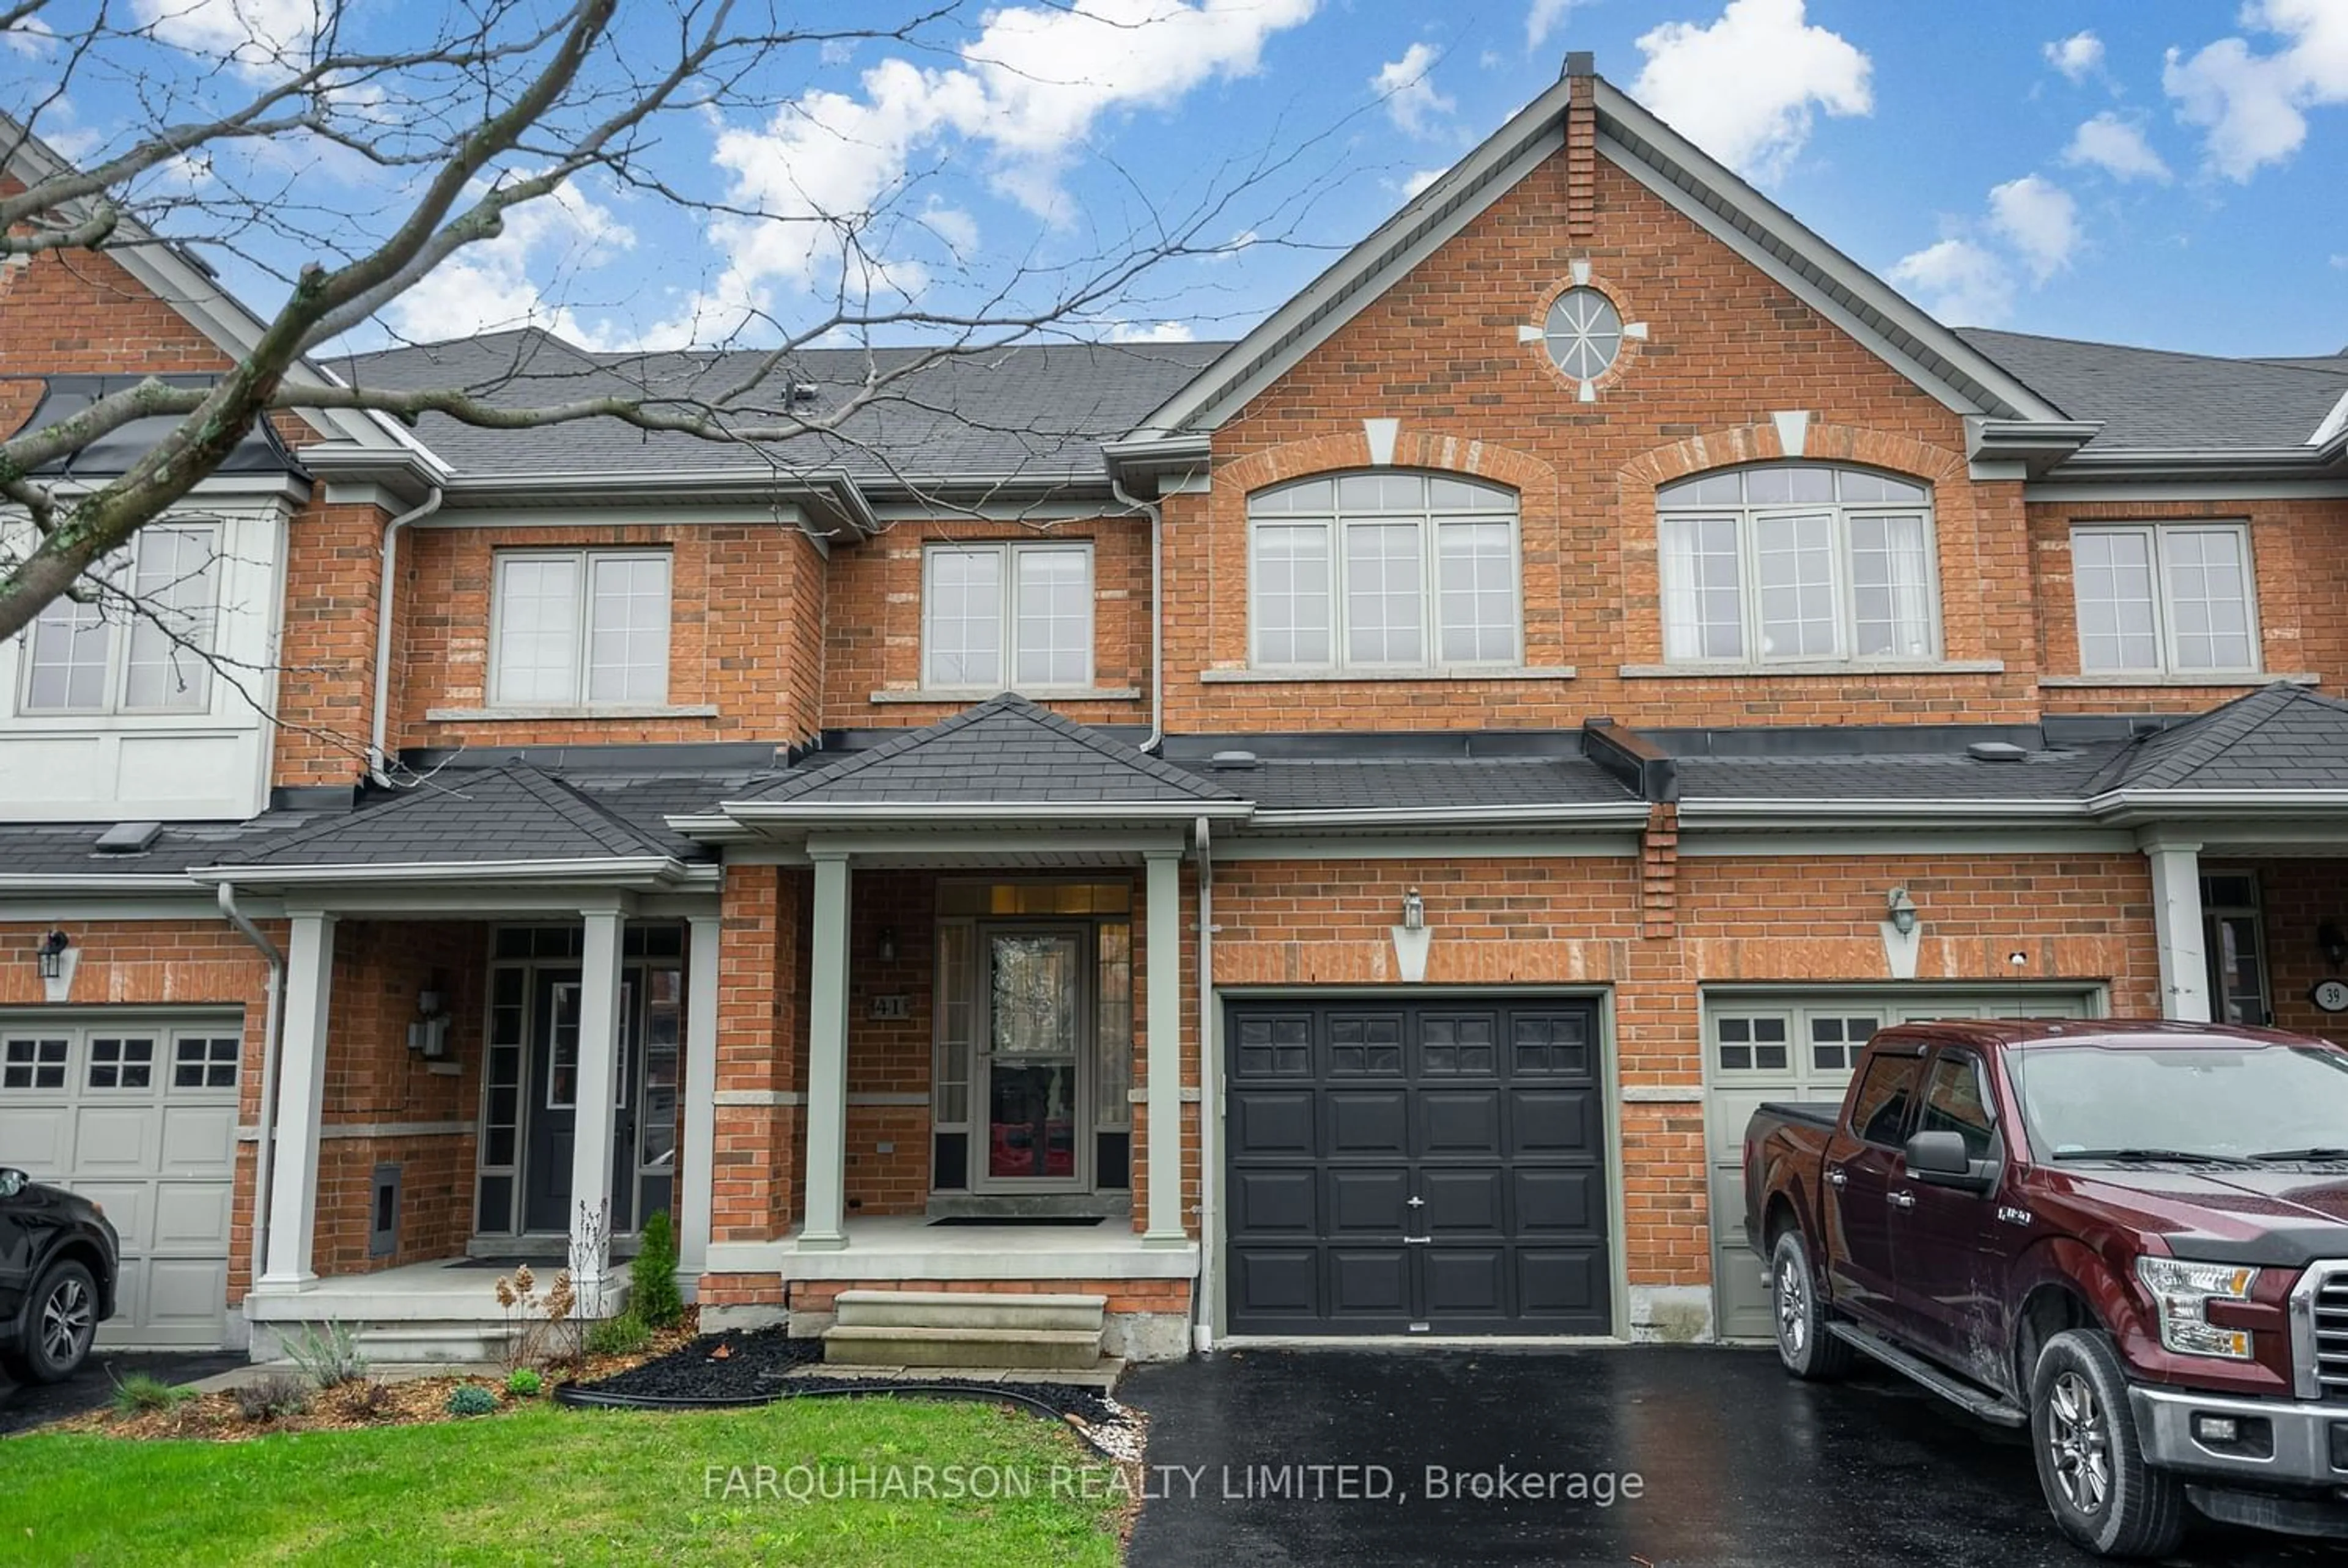 Home with brick exterior material for 41 Westport Dr, Whitby Ontario L1R 0J4